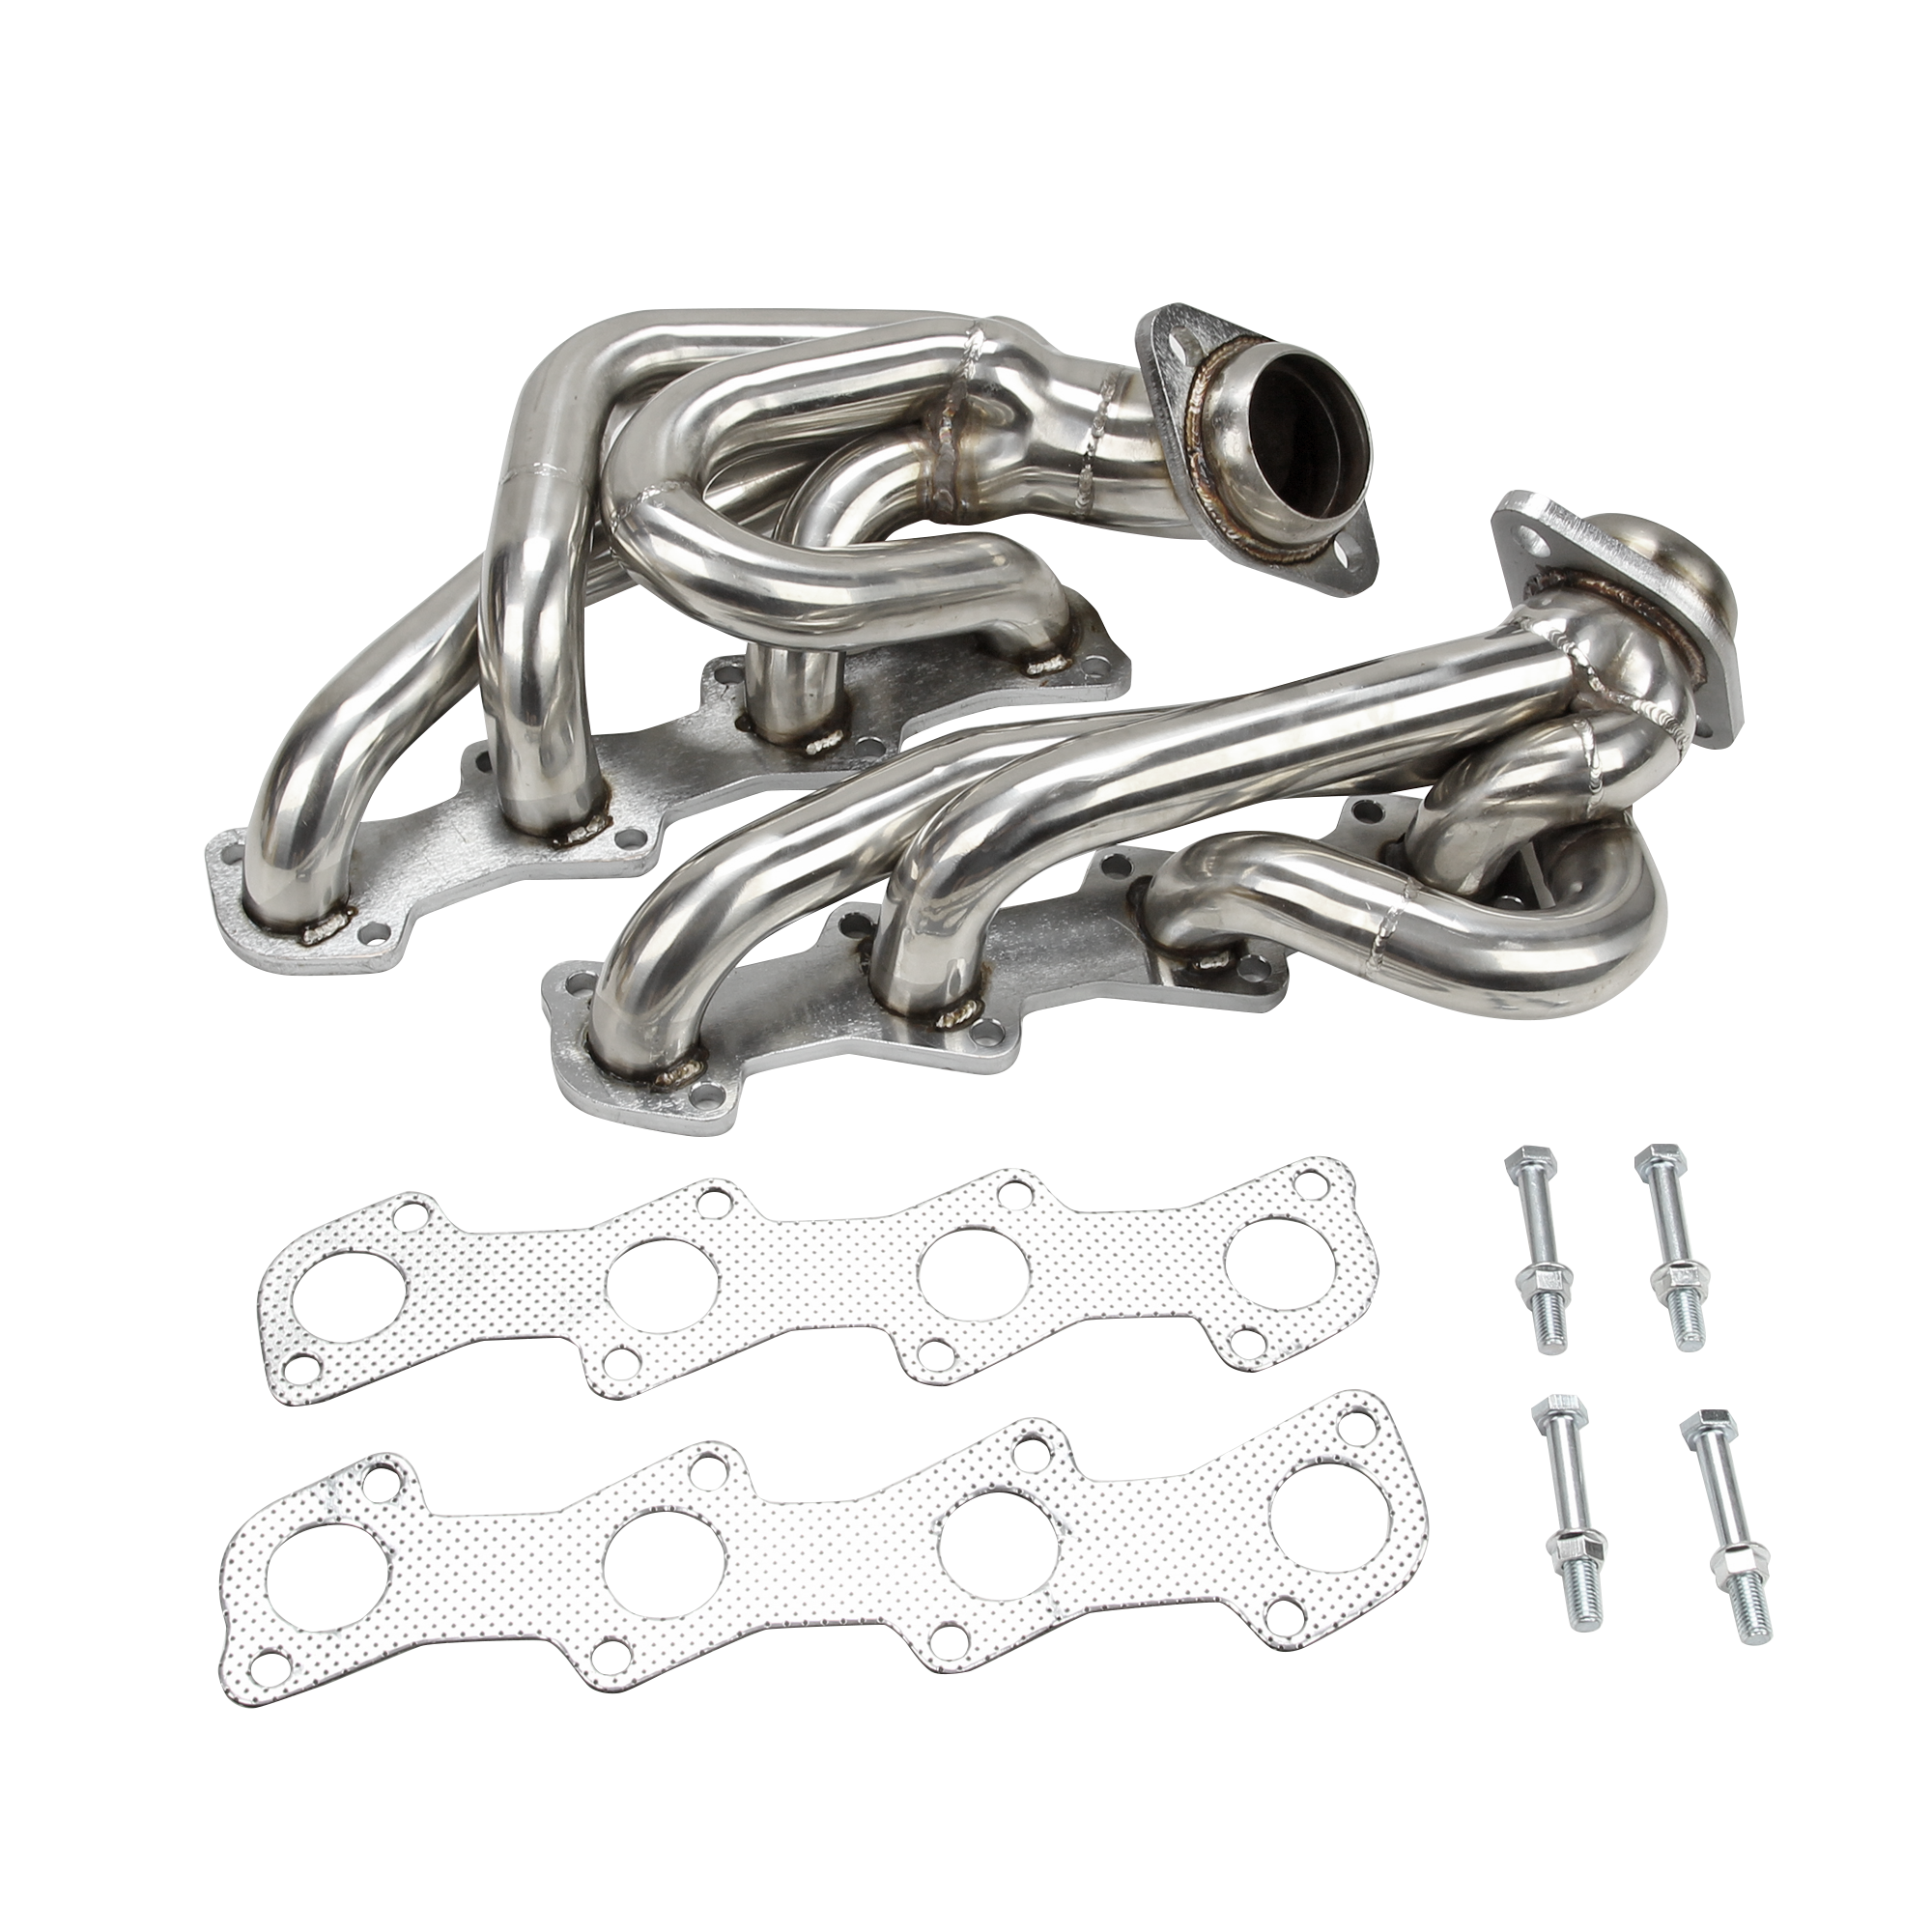 MILLION PARTS 4-1 Design Stainless Steel Header Exhaust System Kit for 1997-2003 Ford F-150 & 1997-1999 F-250 